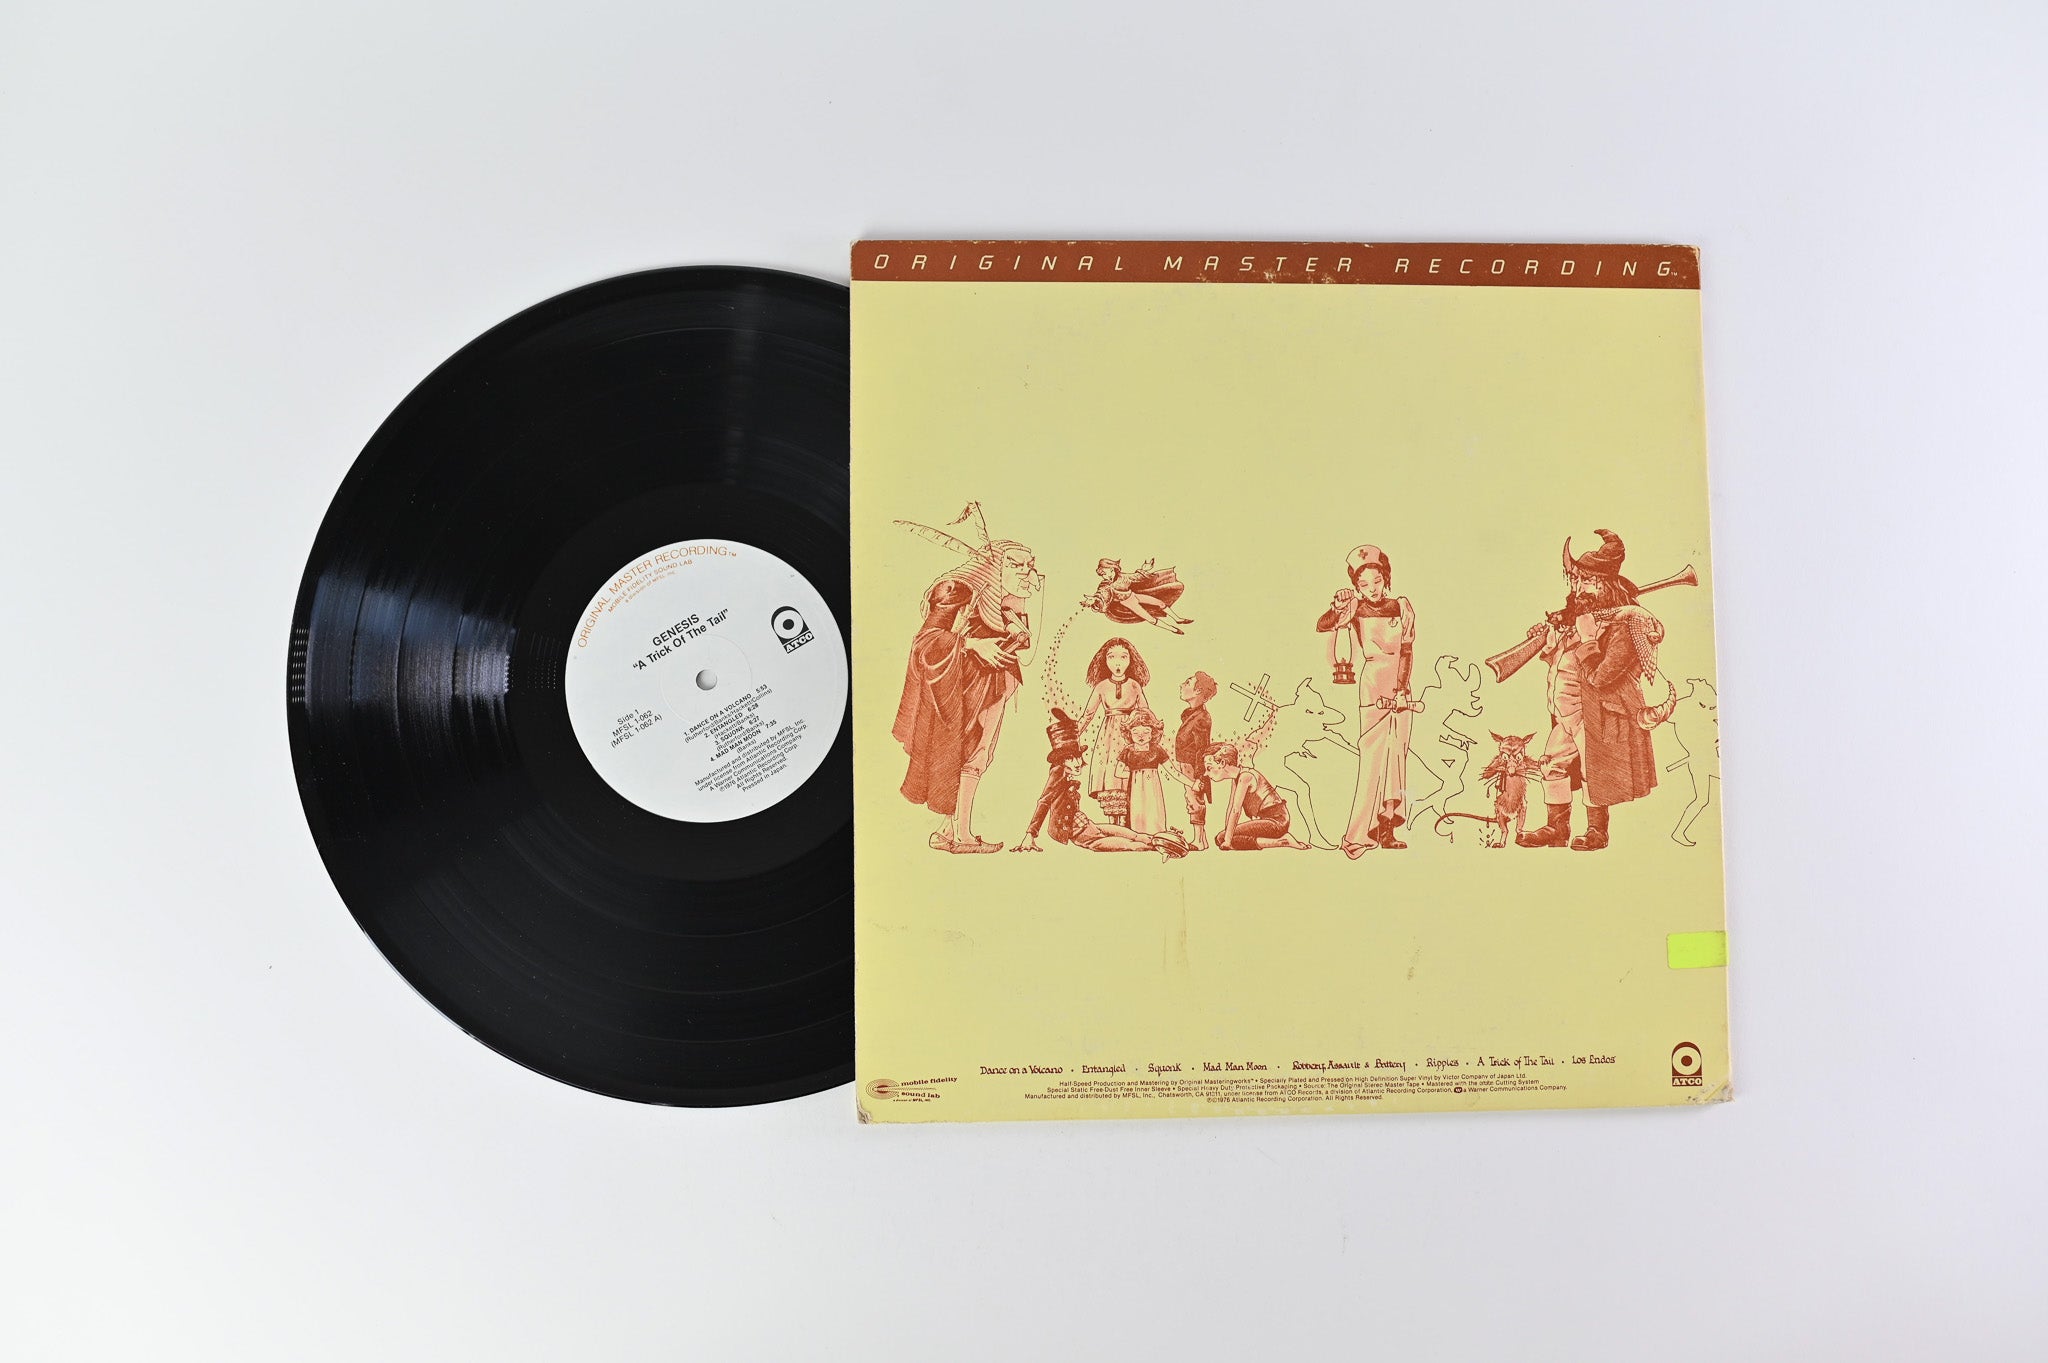 Genesis - A Trick Of The Tail Reissue on Mobile Fidelity Sound Lab